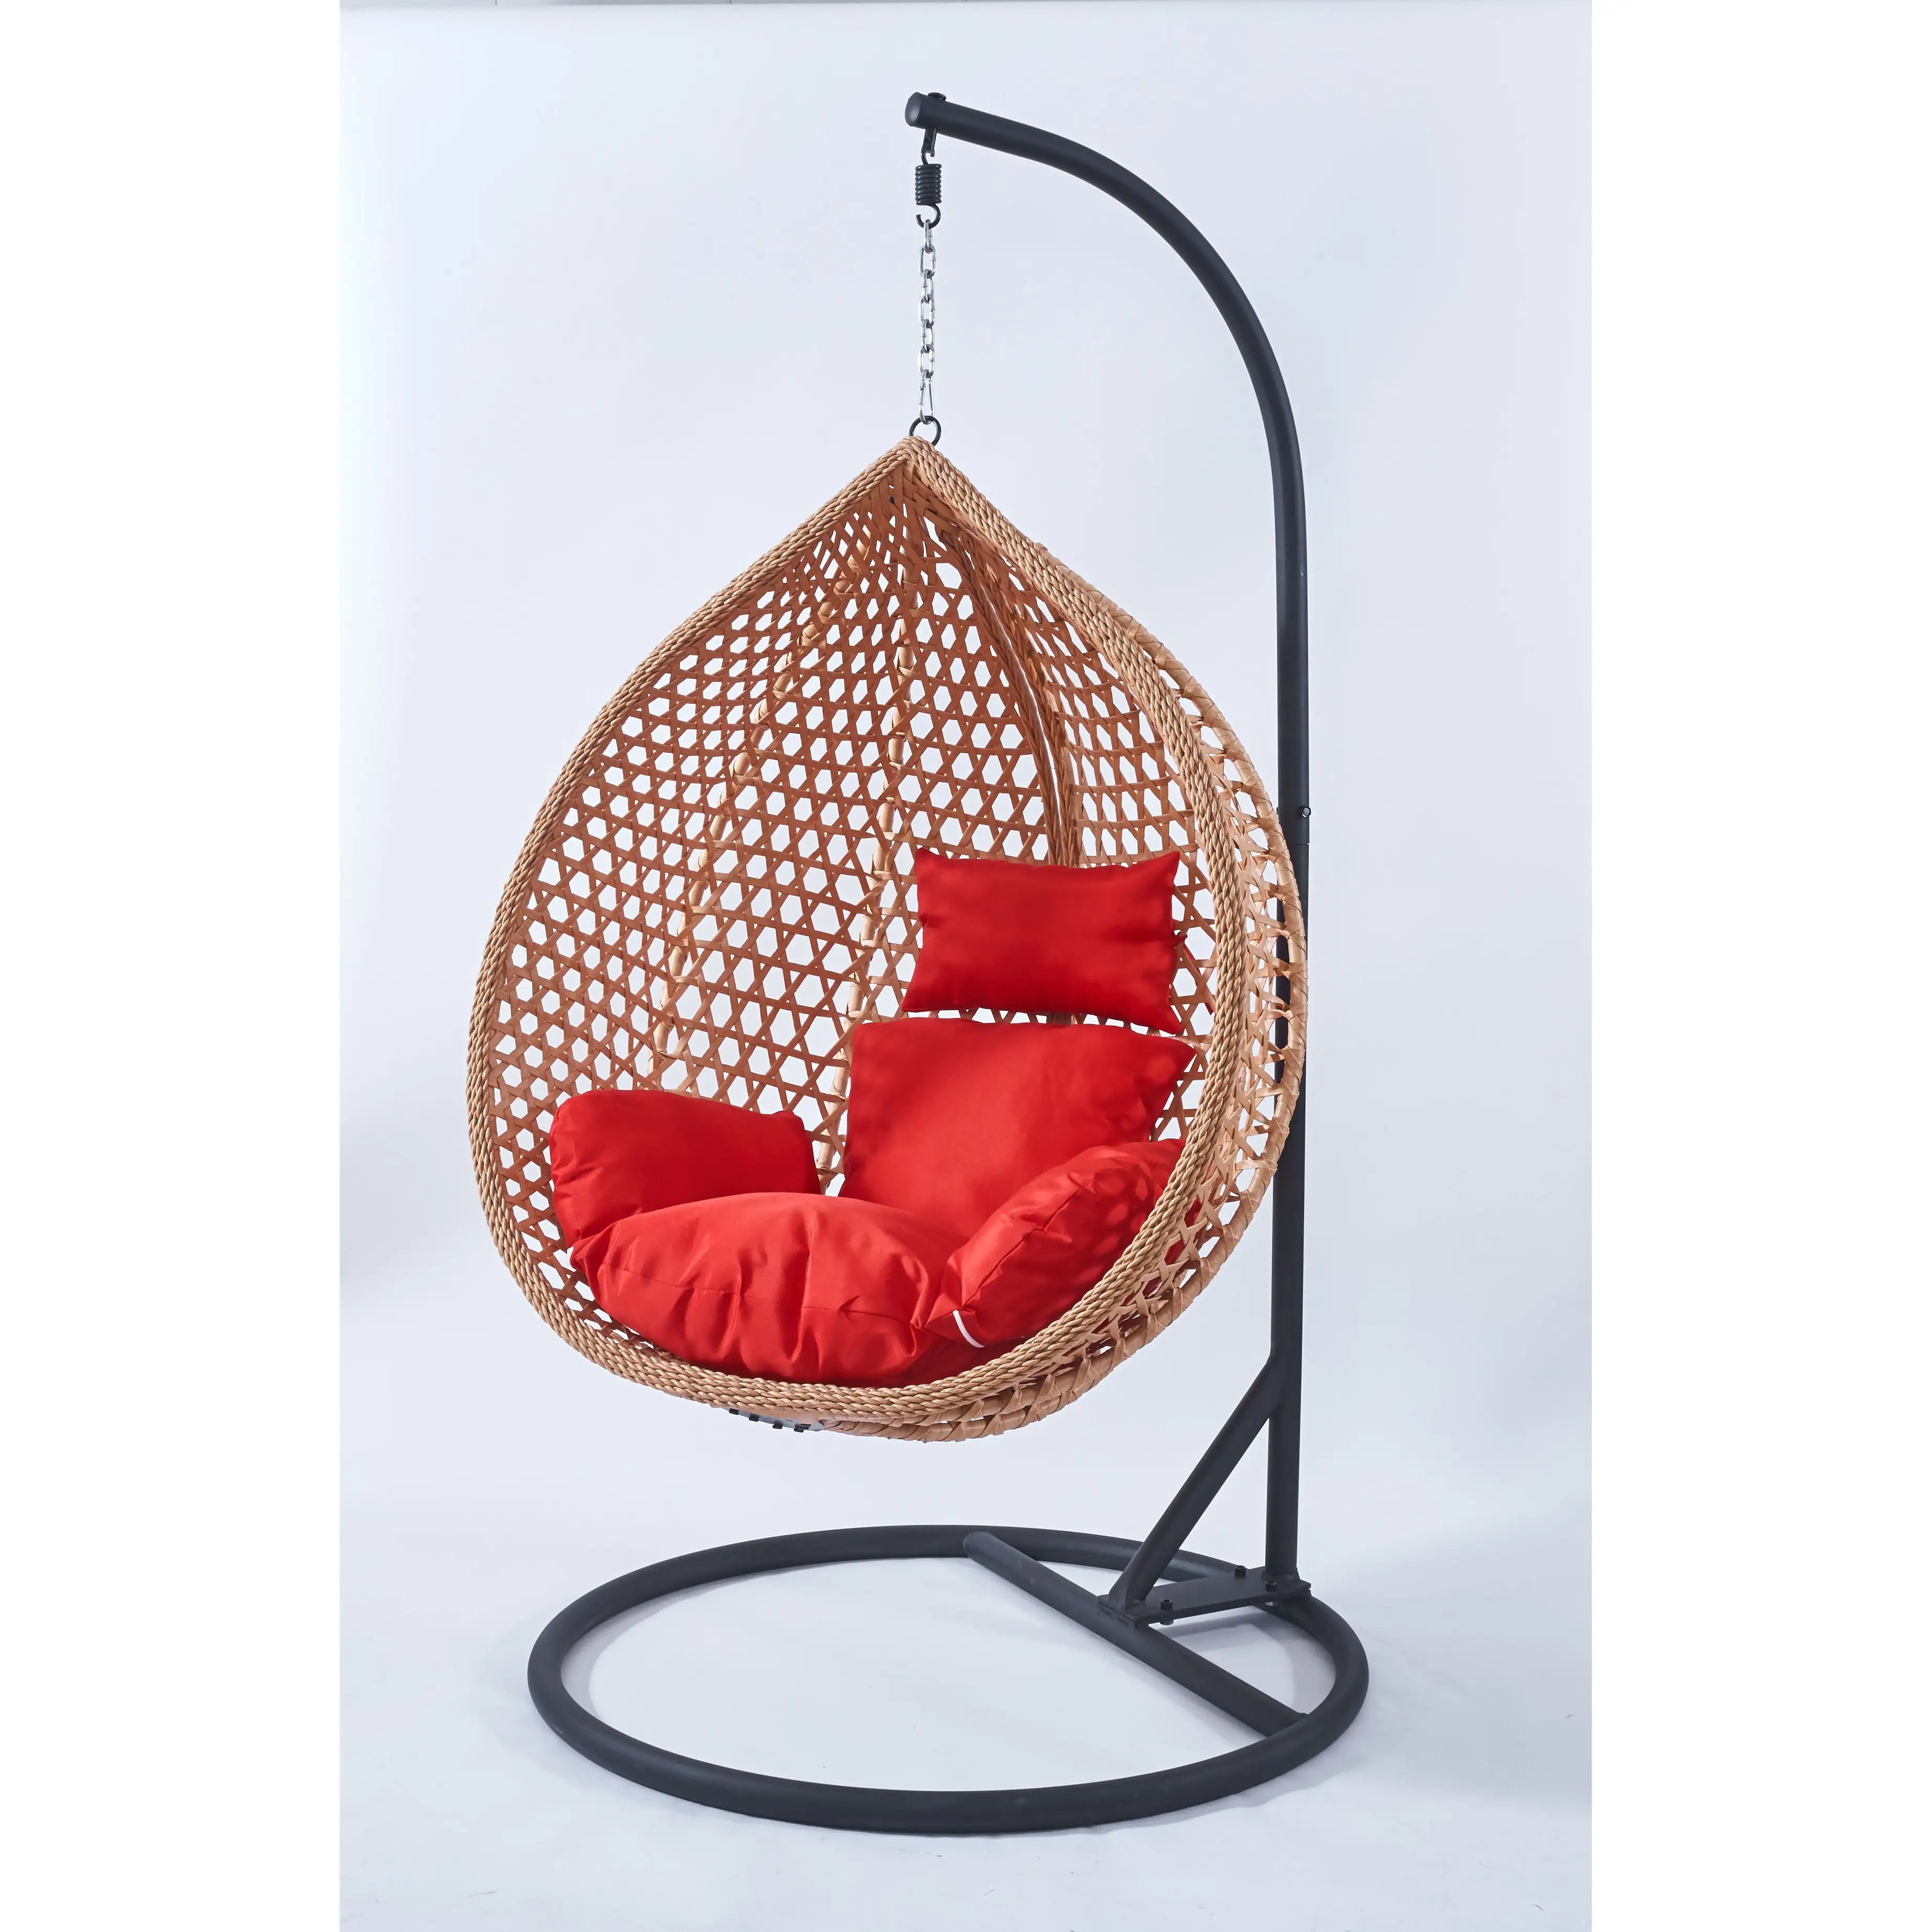 Swing iron hammoch chair spring beauty salon extended single covers coppia impermeabile sedie a forma di uovo rosso gamba in metallo